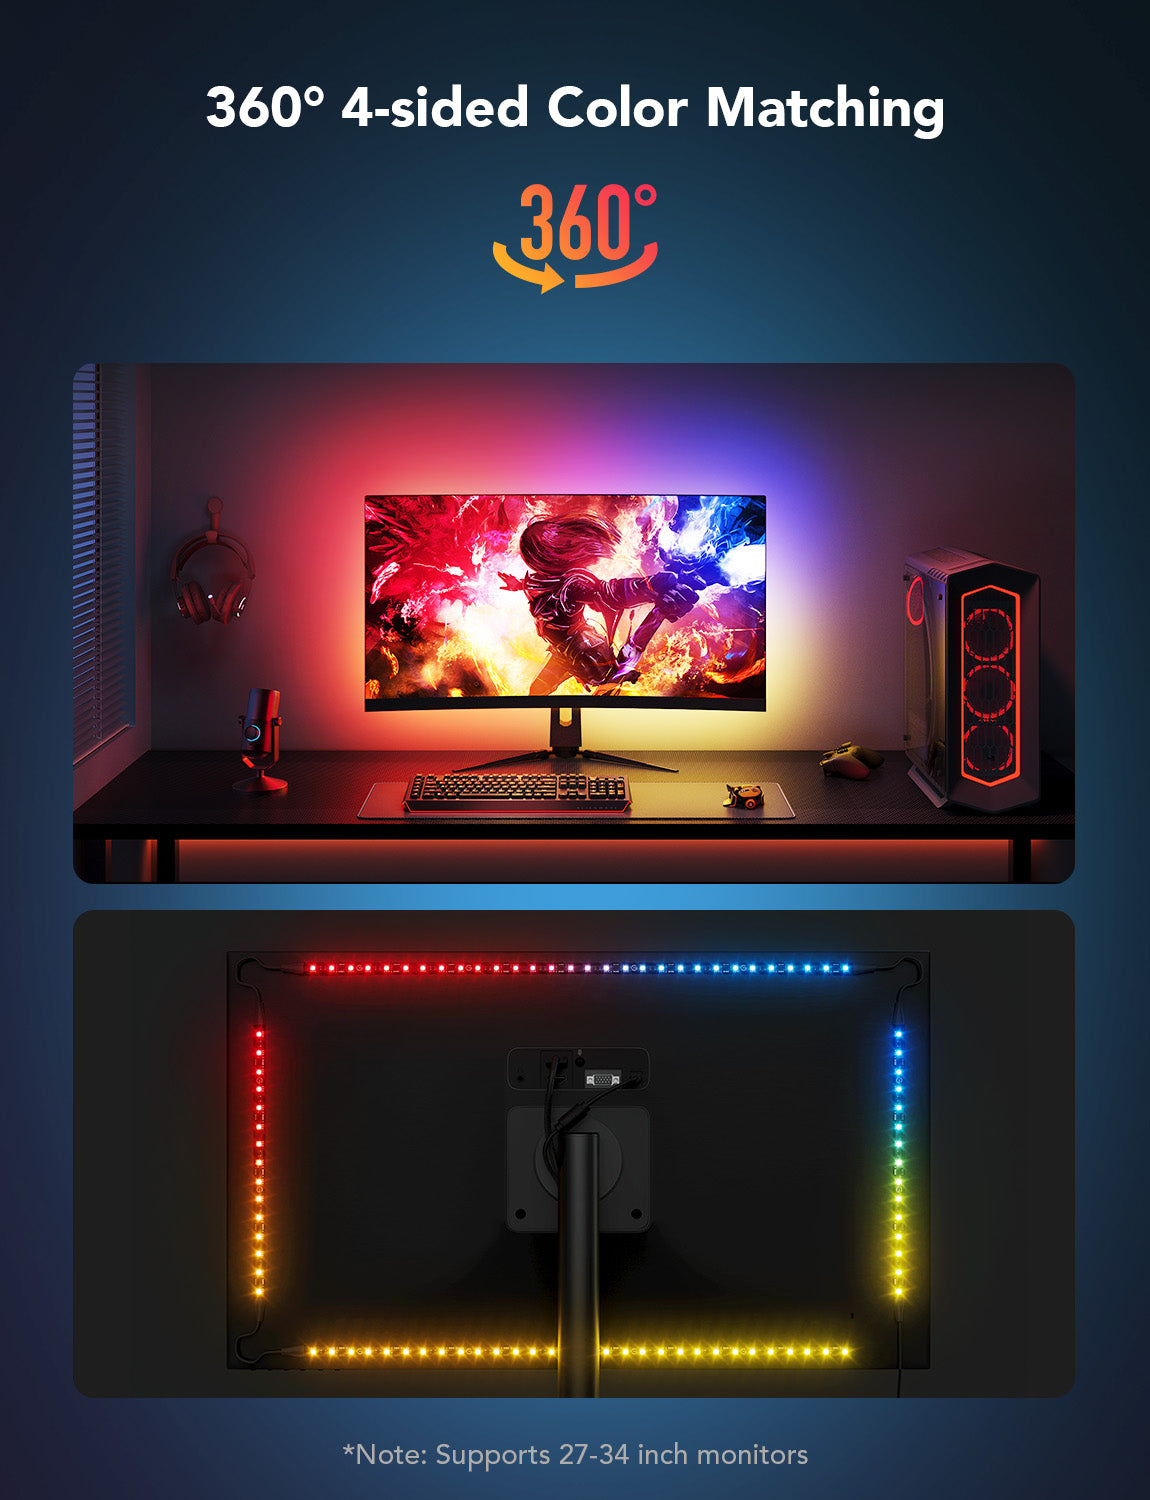 Govee LED Strip Light M1 (5m) - Matter & Apple HomeKit Support RGBICW –  Govee South Africa